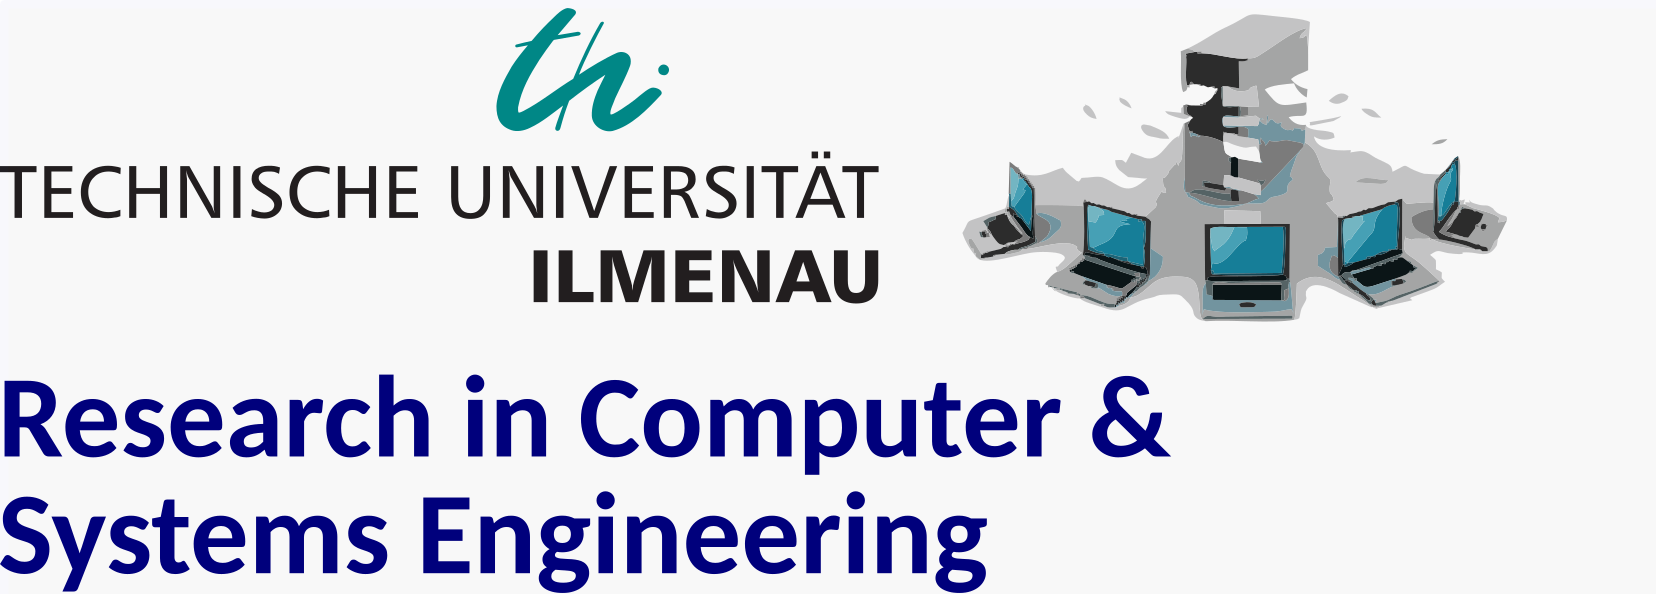  Research in Computer & Systems Engineering - GRIAT double degree